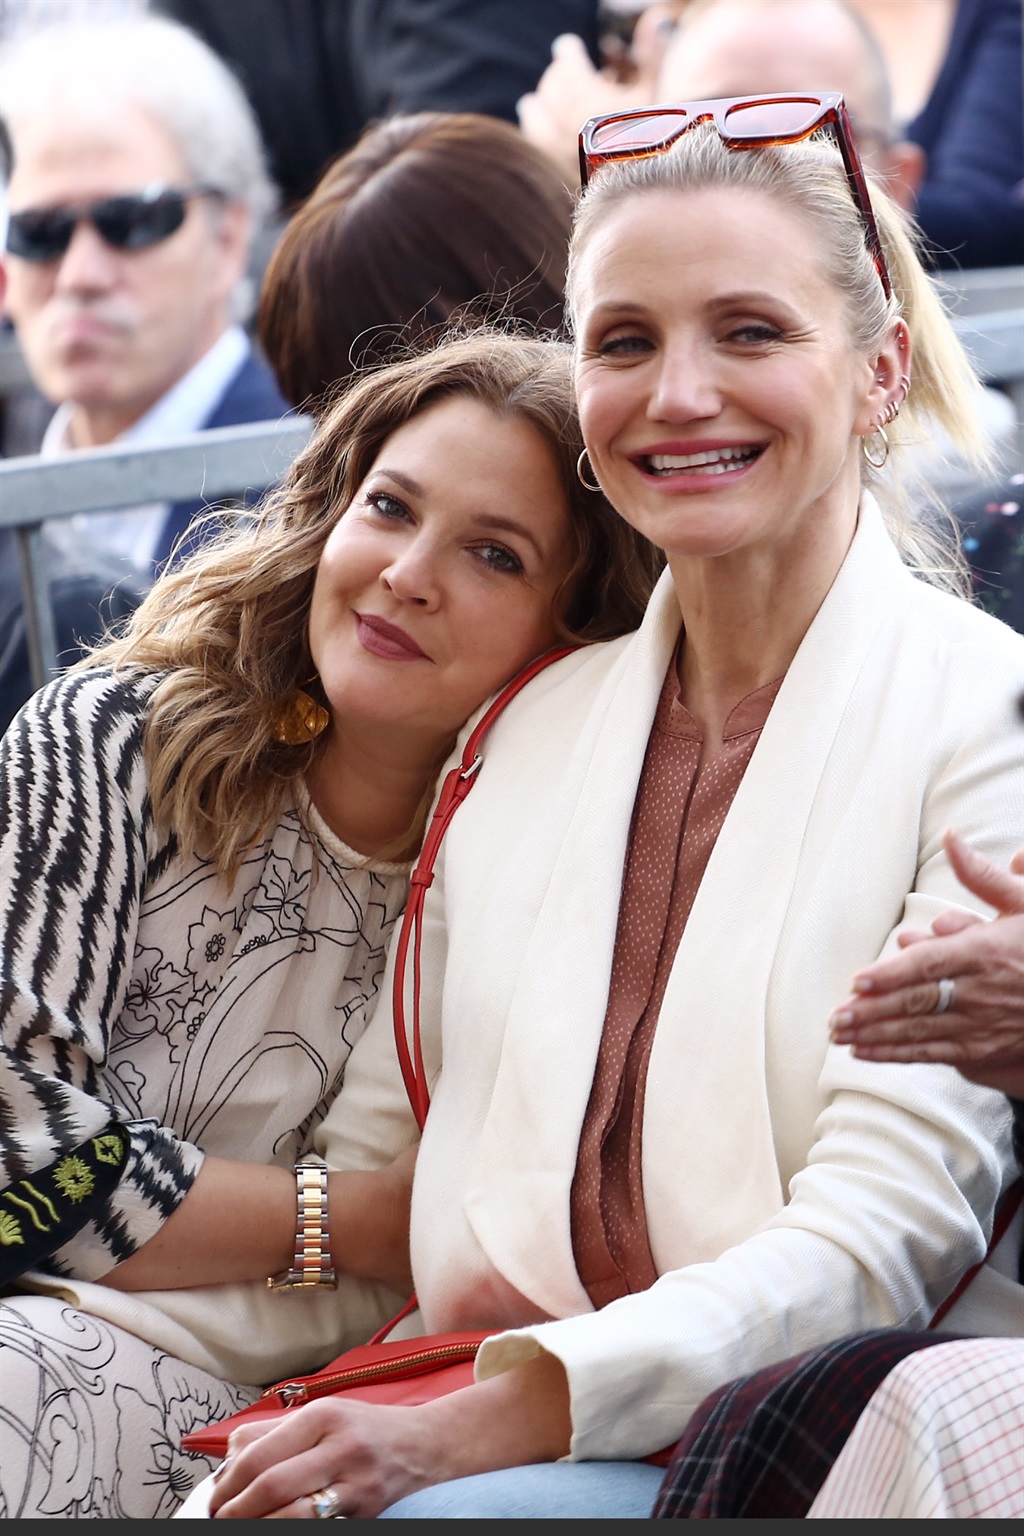  Drew Barrymore and Cameron Diaz attend a ceremony